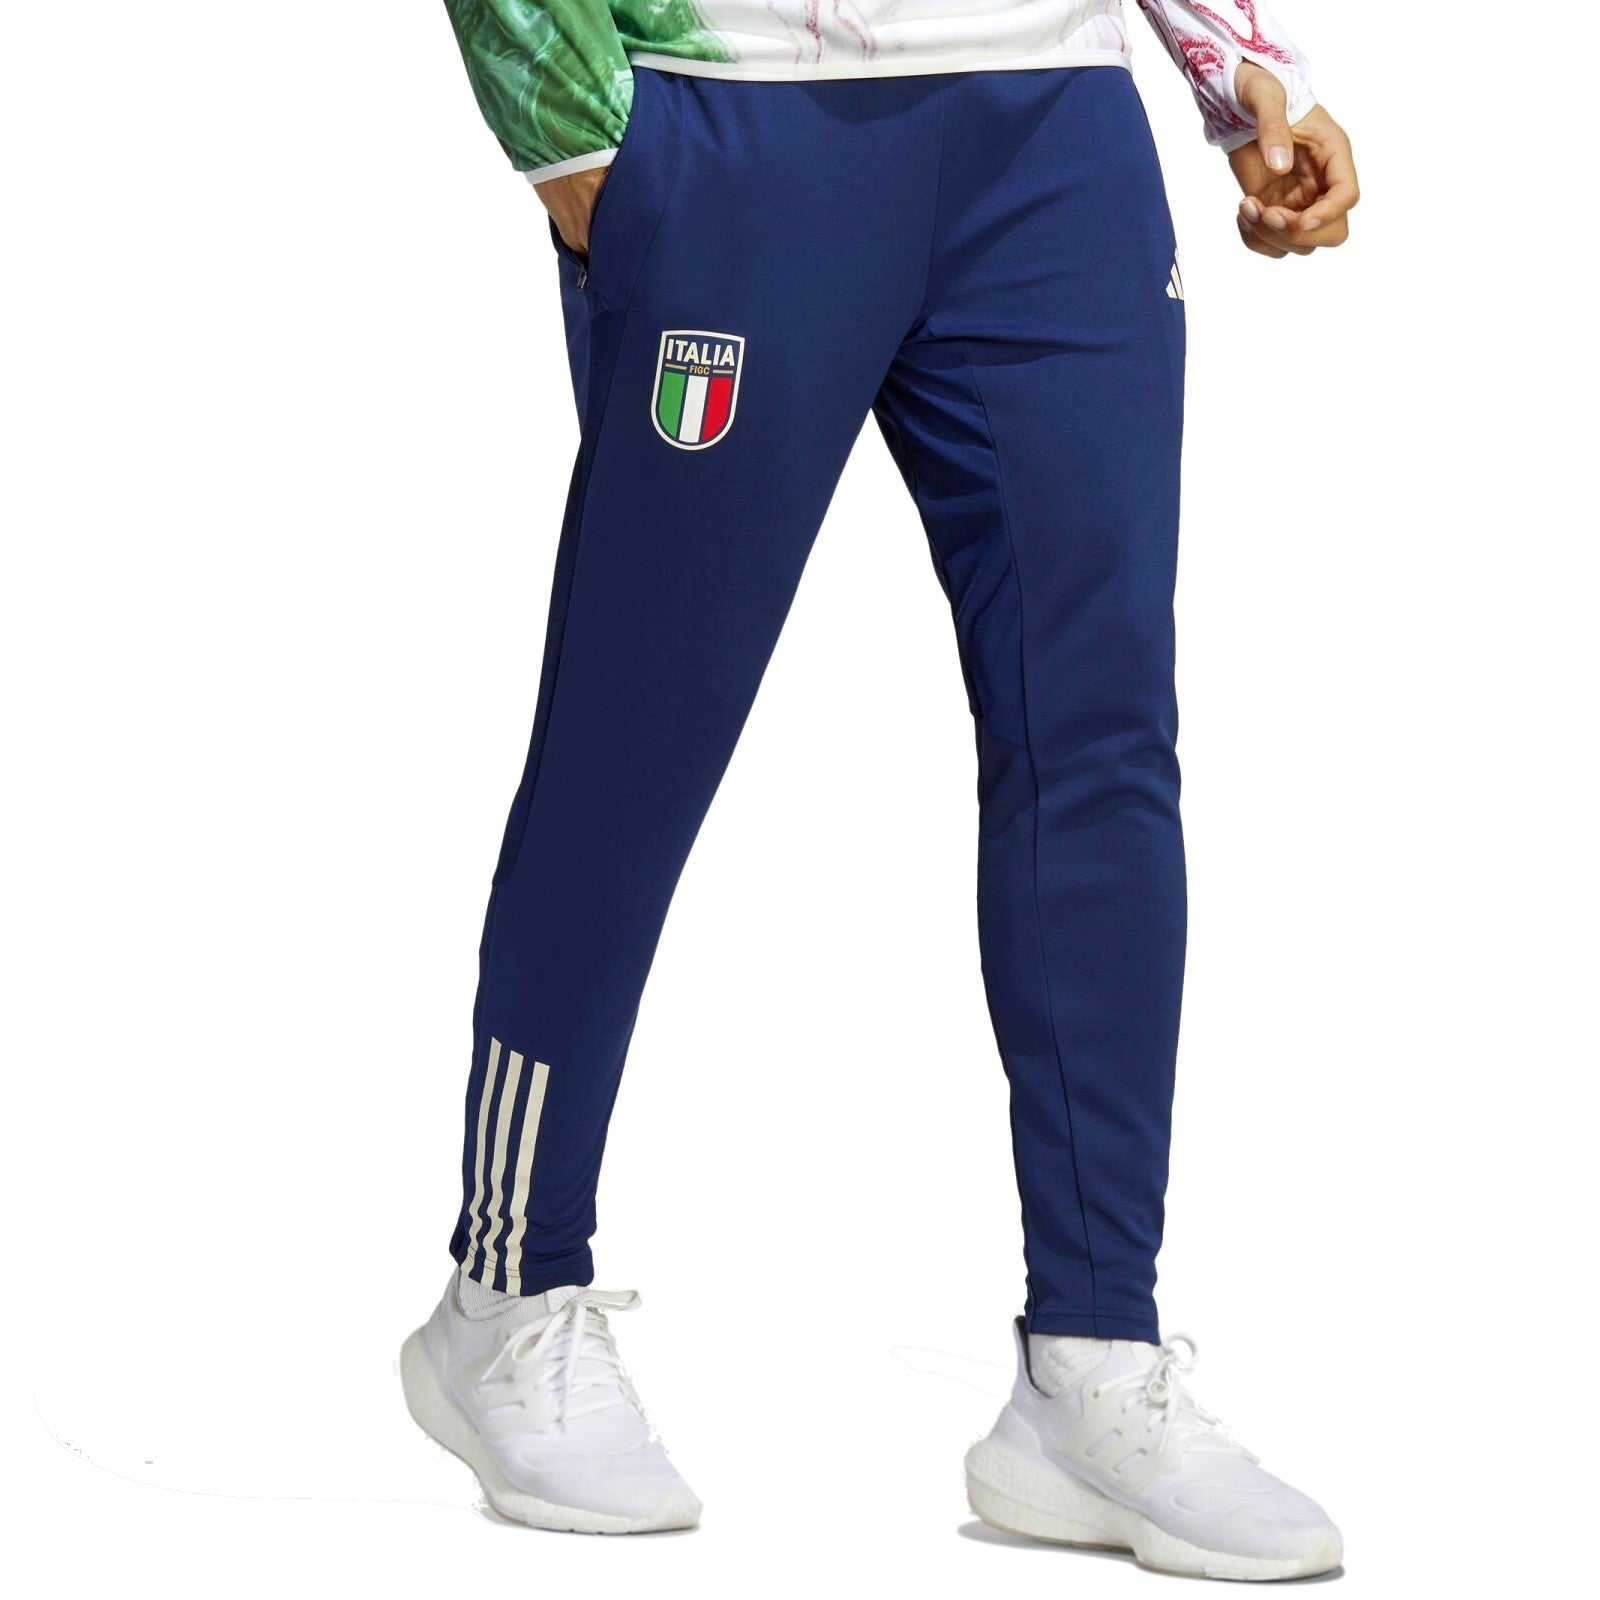 Soccer Tracksuits & Jackets, Italy Tracksuit